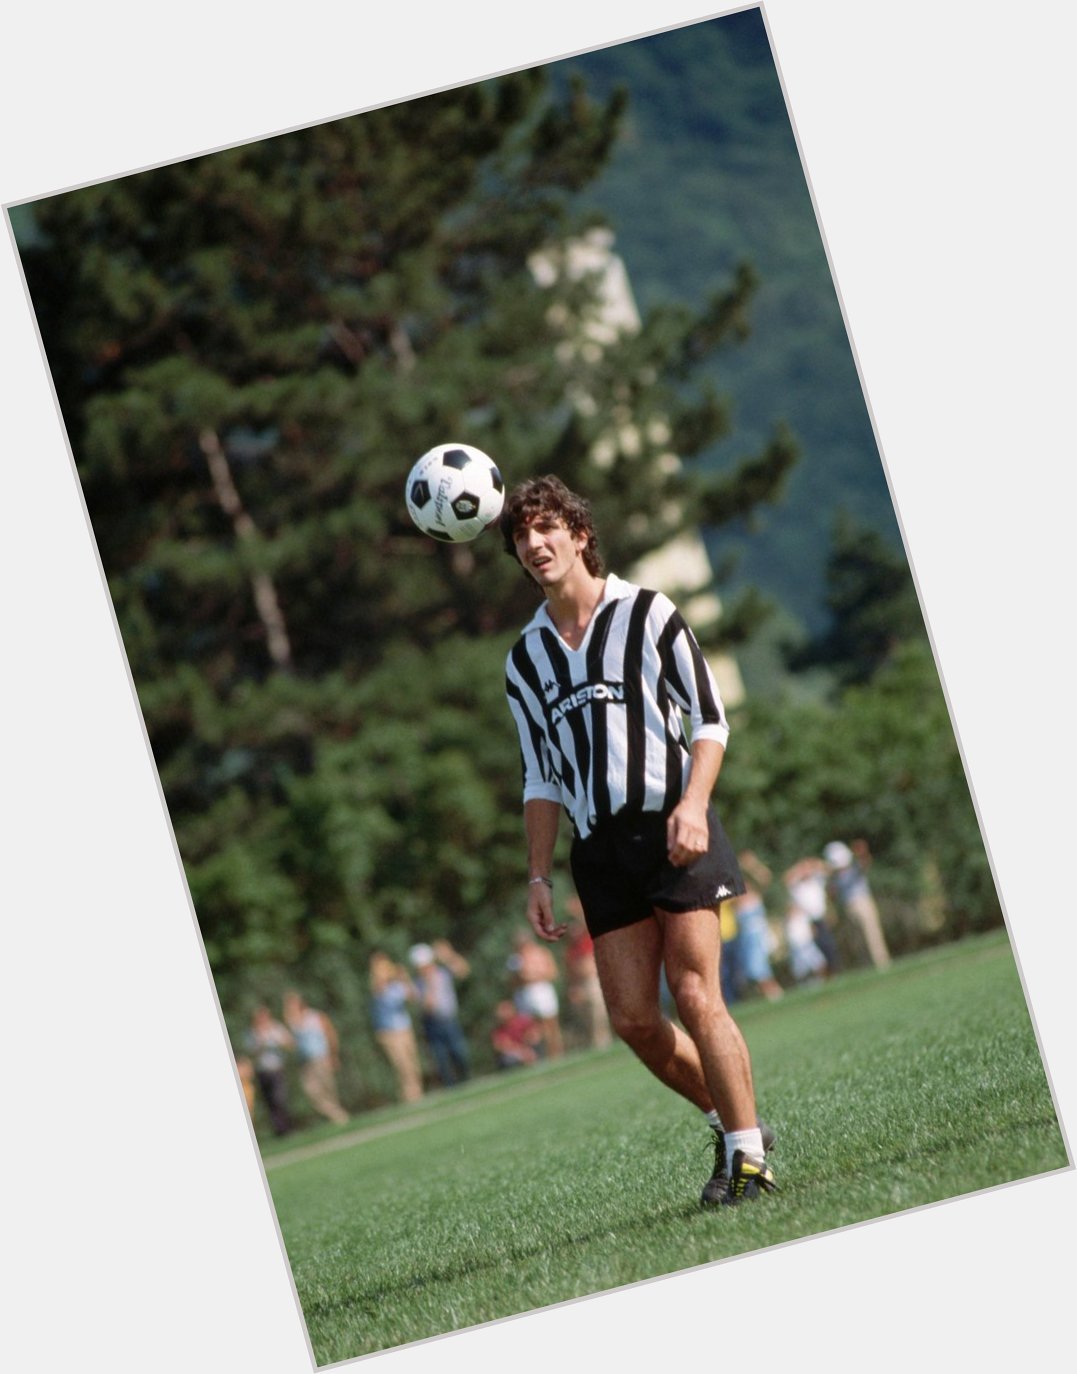 Happy birthday to Juventus legend Paolo Rossi, who turns 61 today.

Games: 138
Goals: 44 : 6 